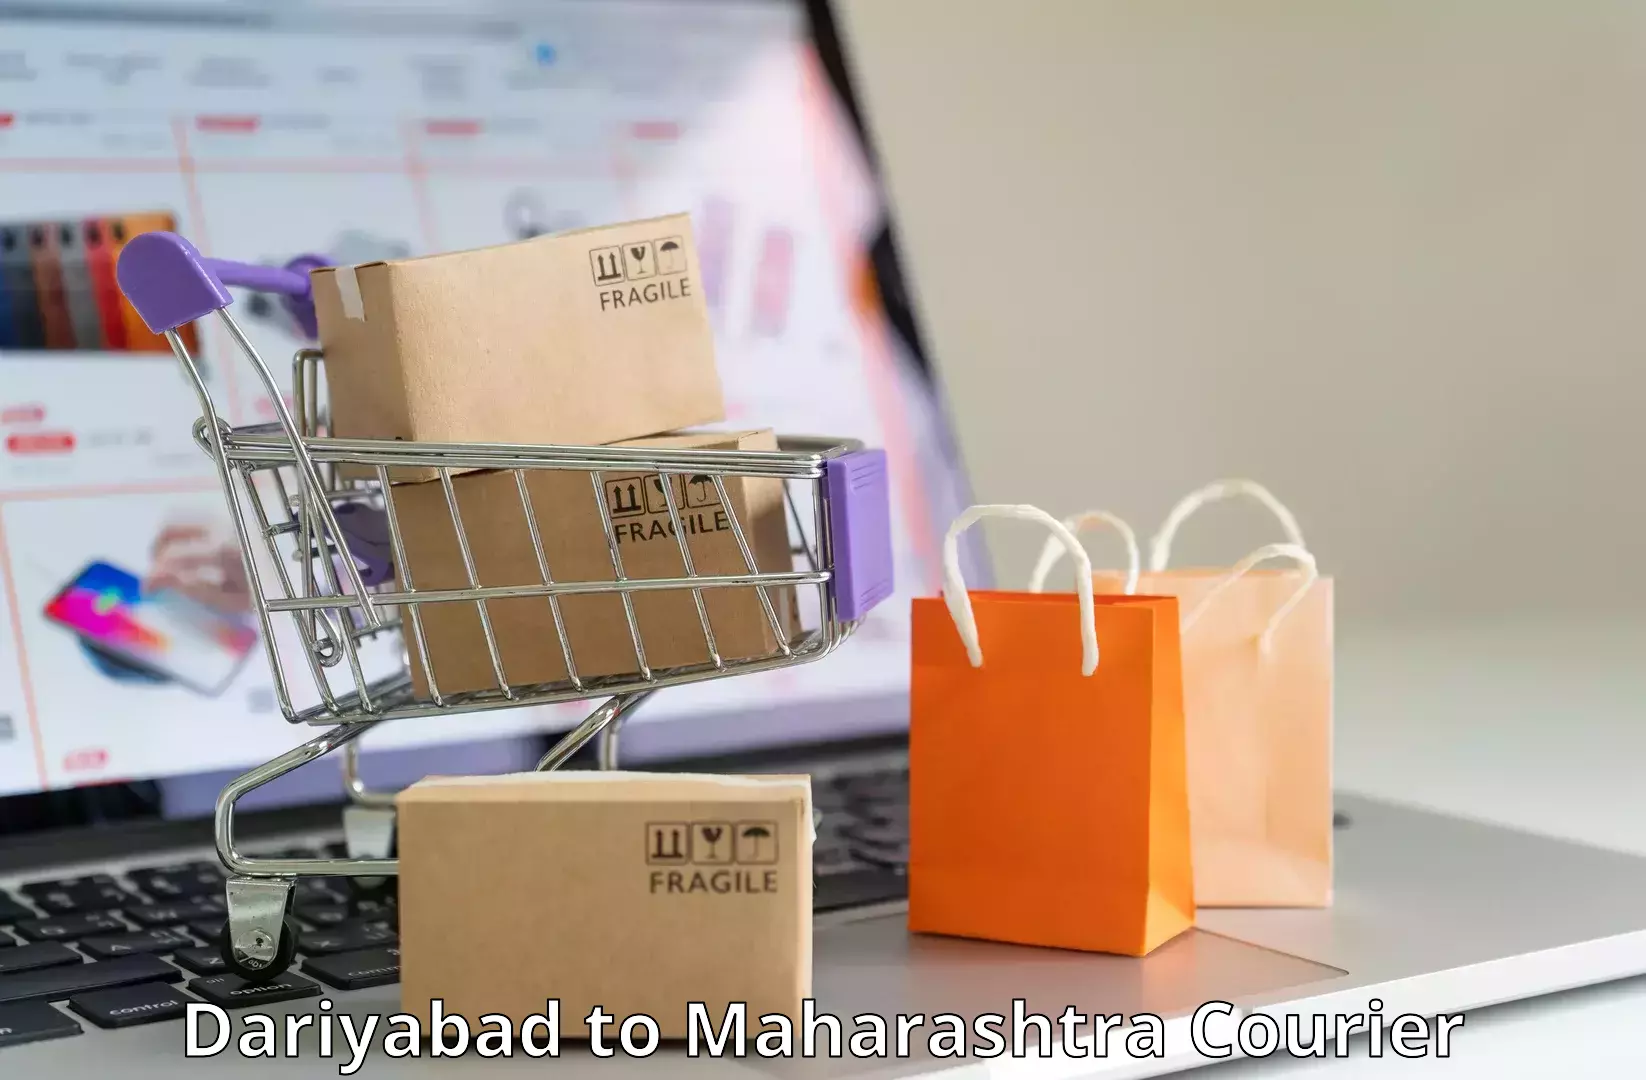 Reliable courier services in Dariyabad to Bhiwandi